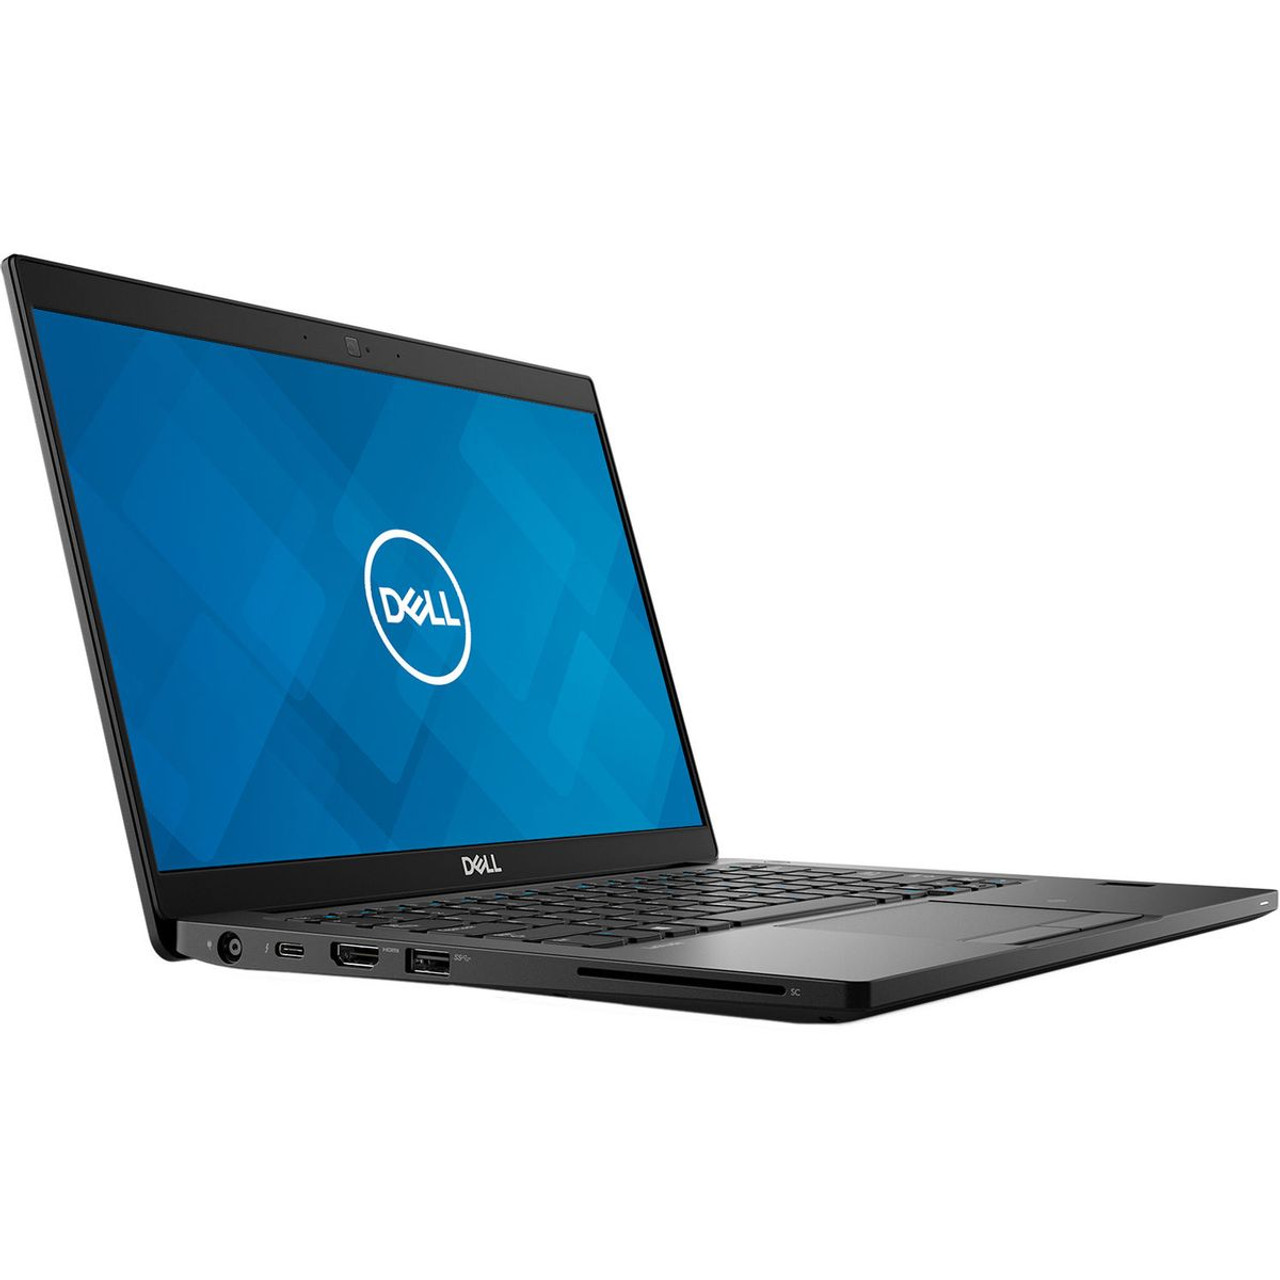 Dell® Latitude 7390 2-in-1, 13.3" FHD Touchscreen, 8GB RAM, 512GB SSD product image